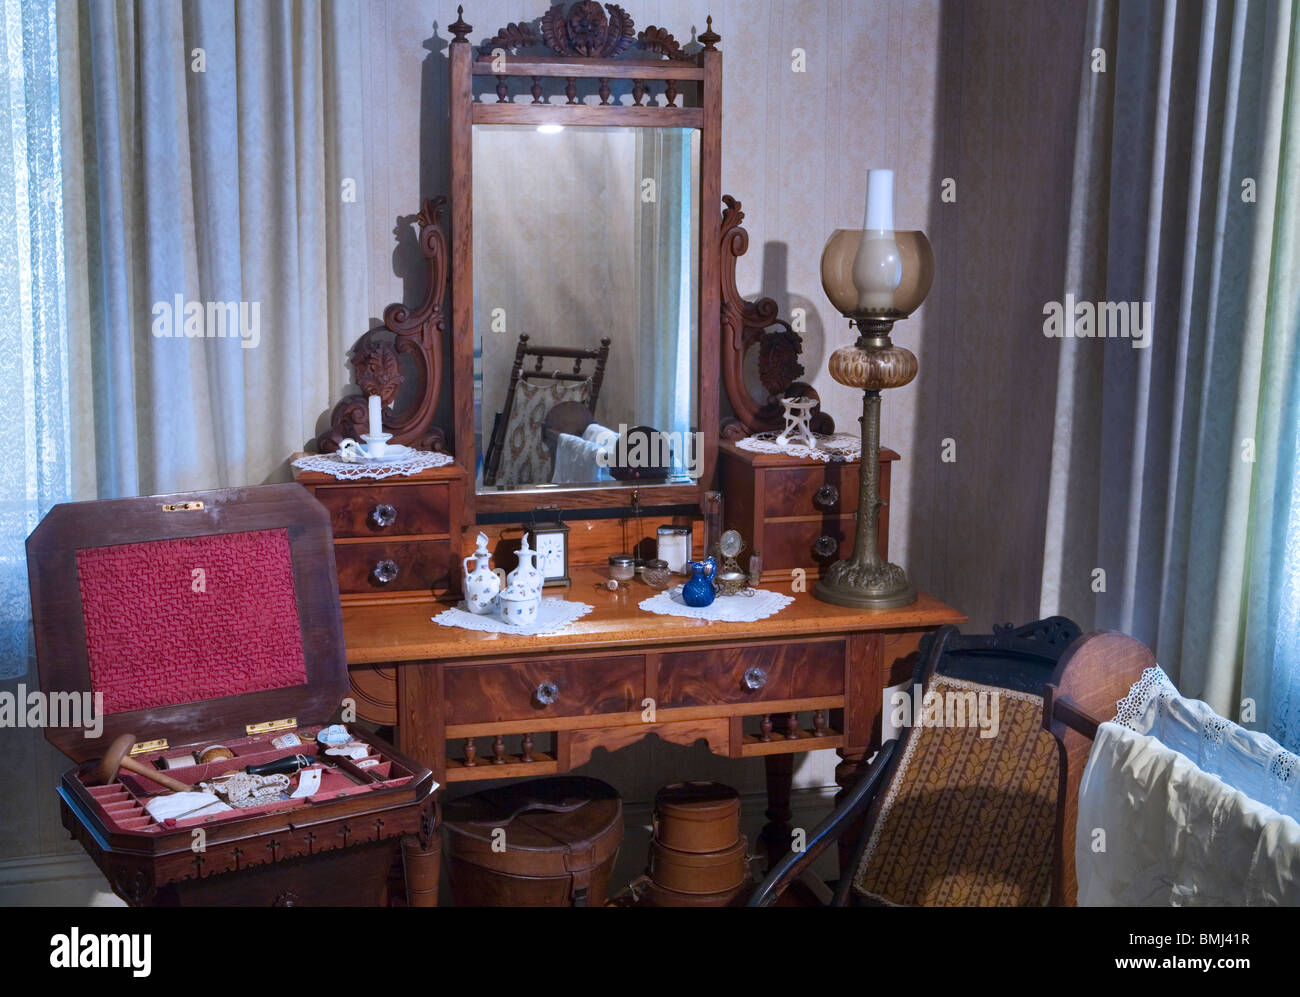 A nineteenth (XIX) century (1800s) bedroom with a vanity mirror and personal hygiene paraphernalia, Auckland, New Zealand Stock Photo